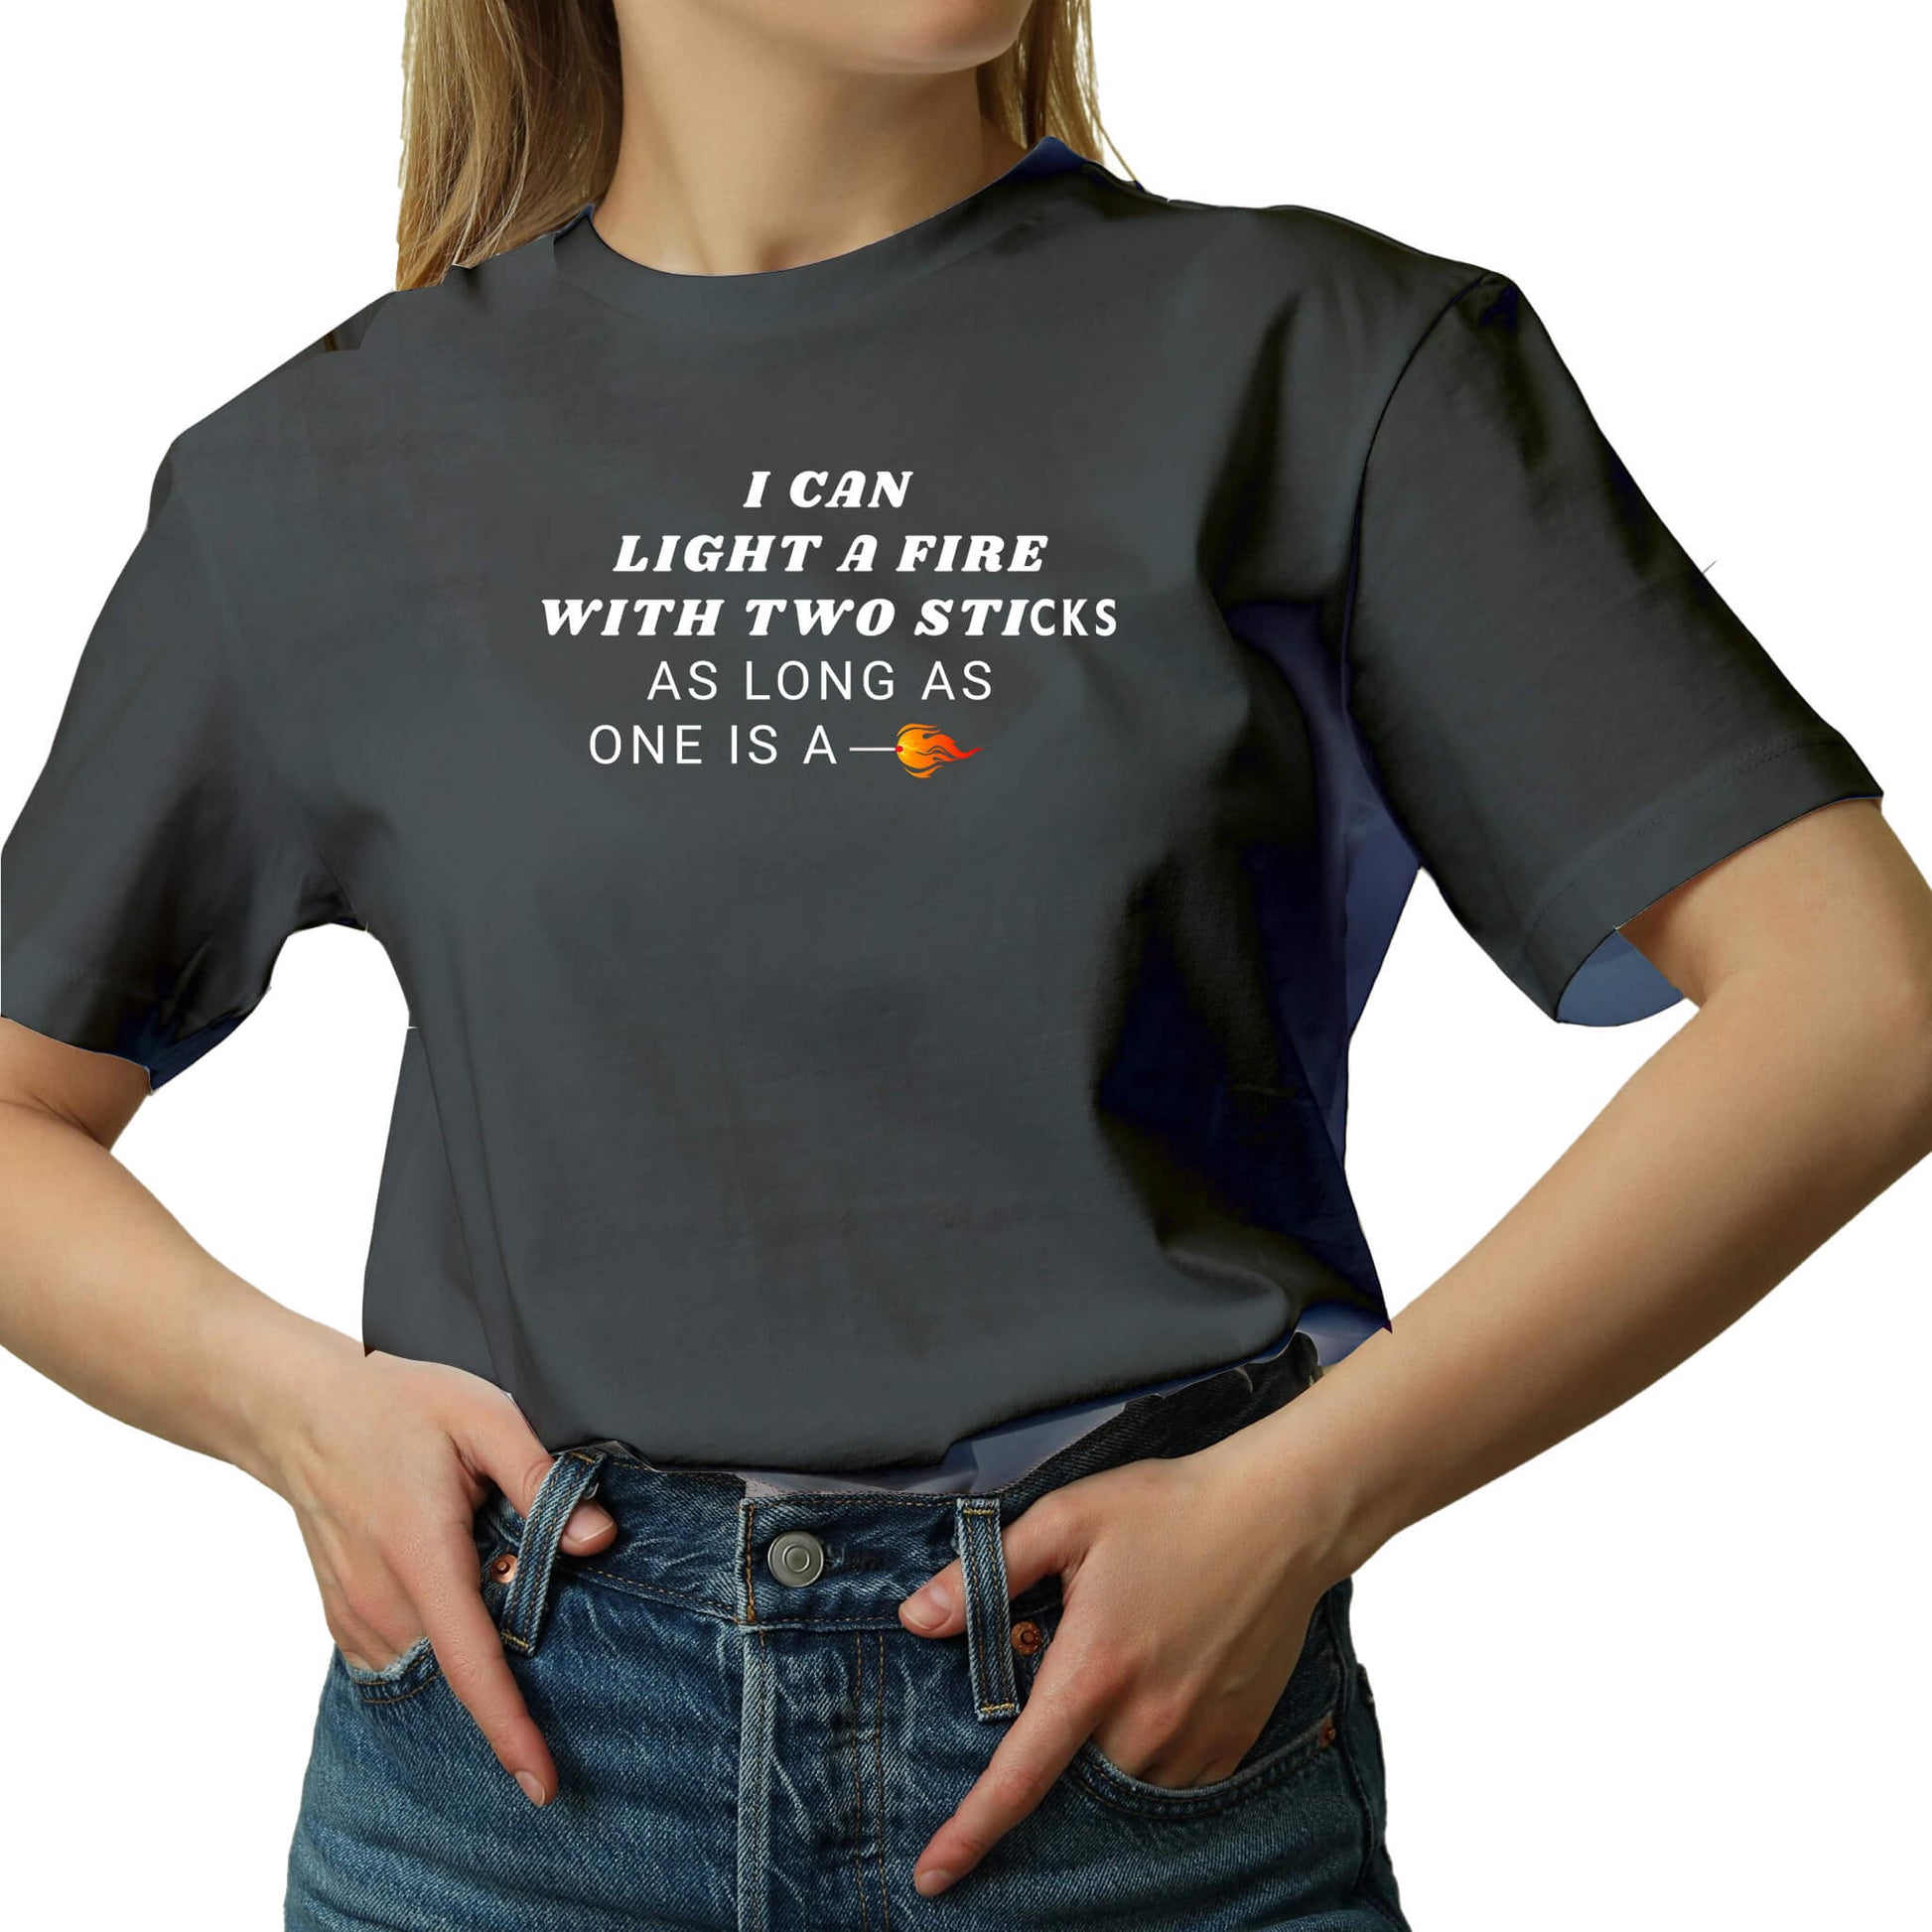 I can light a fire with two sticks t-shirt blue female